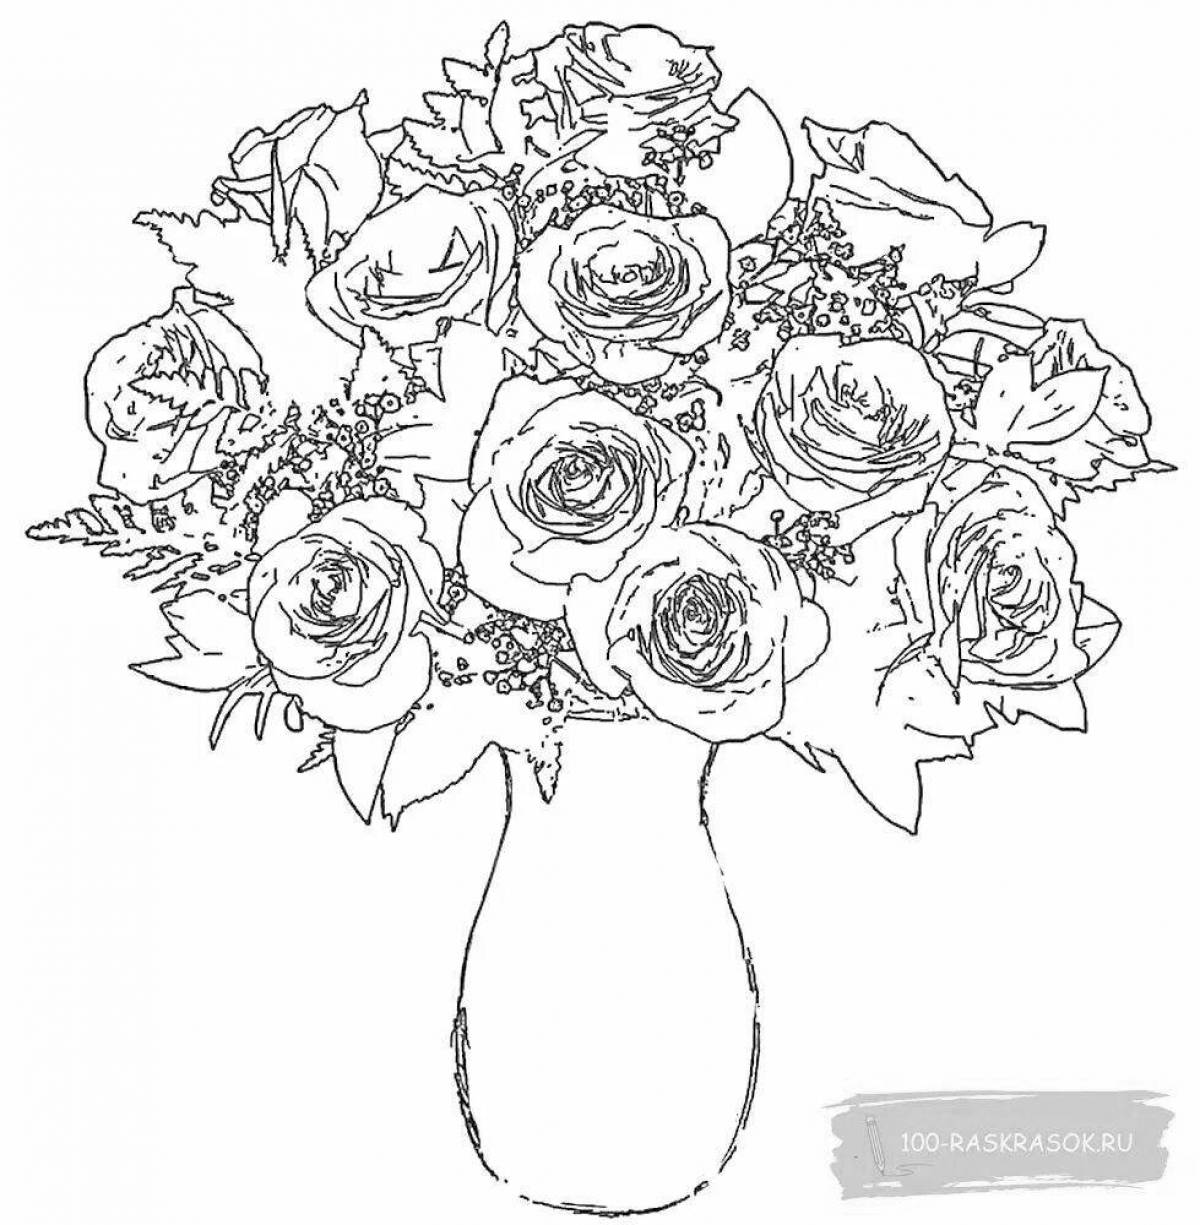 A stunning bouquet of flowers in a vase coloring book